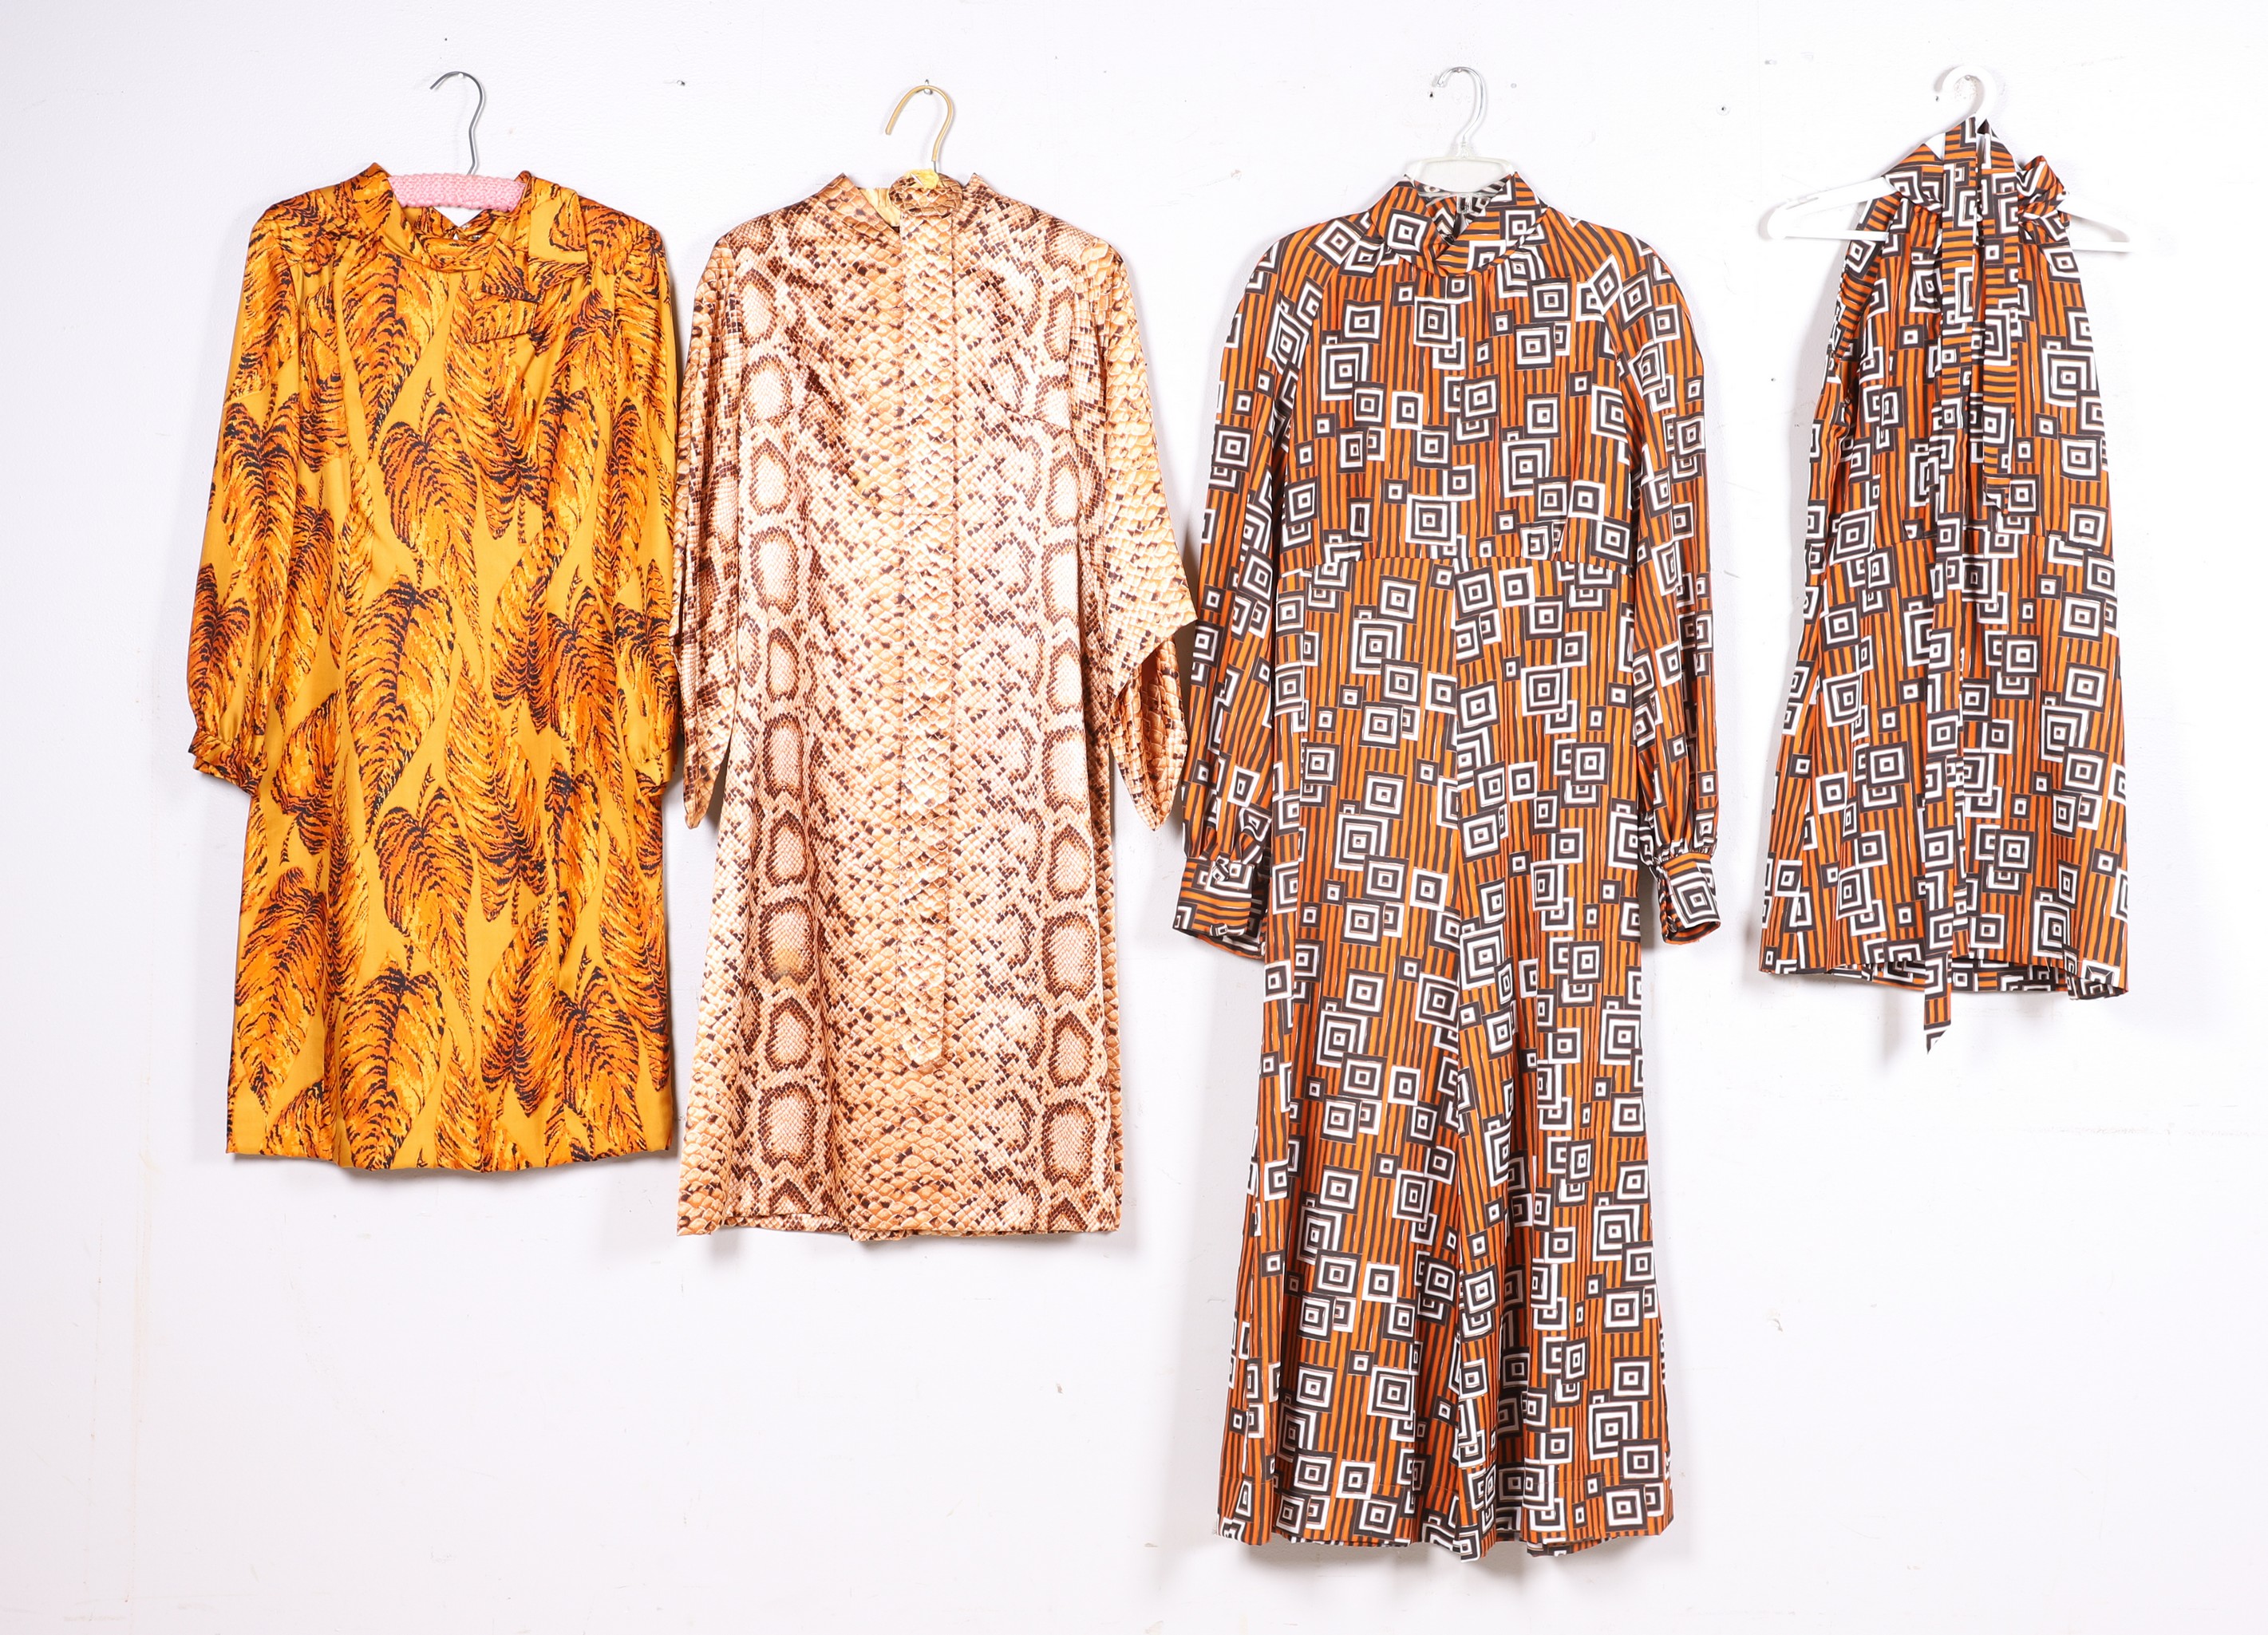  3 Geo and Animal patterned dresses 27a6bd